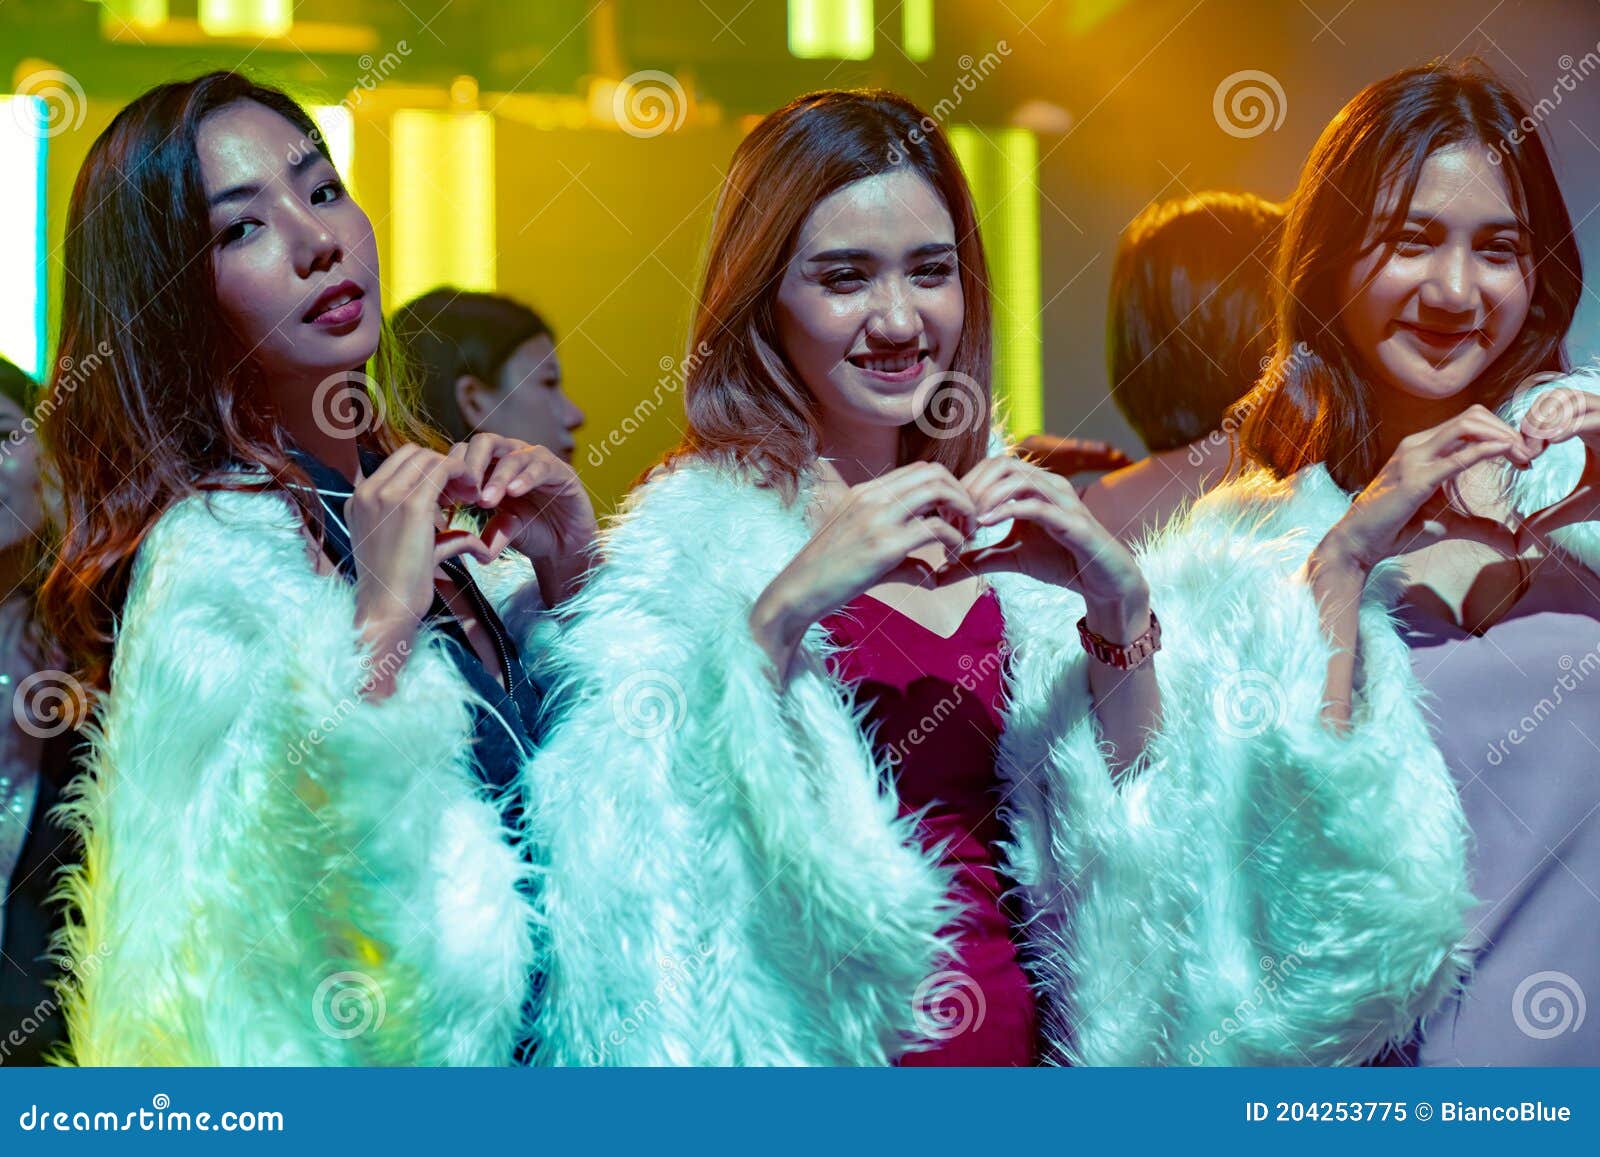 Group Of Women Friend Having Fun At Party In Dancing Club Stock Image Image Of Luxury Group